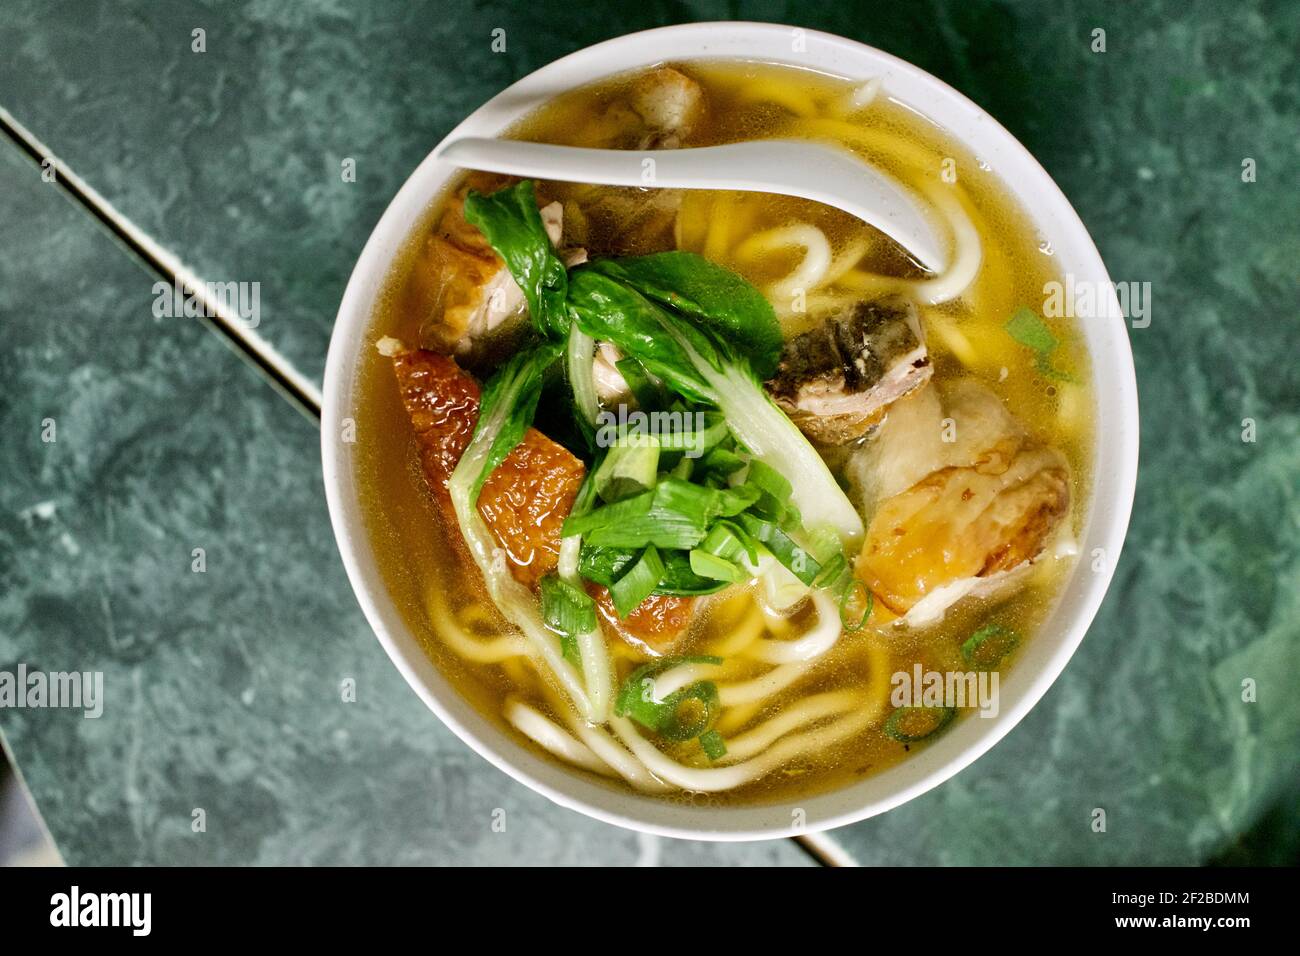 Roasted duck and noodle soup at Chinatown Express Restaurant in Washington, D.C.  D.C.’s most authentic Chinese restaurant Stock Photo